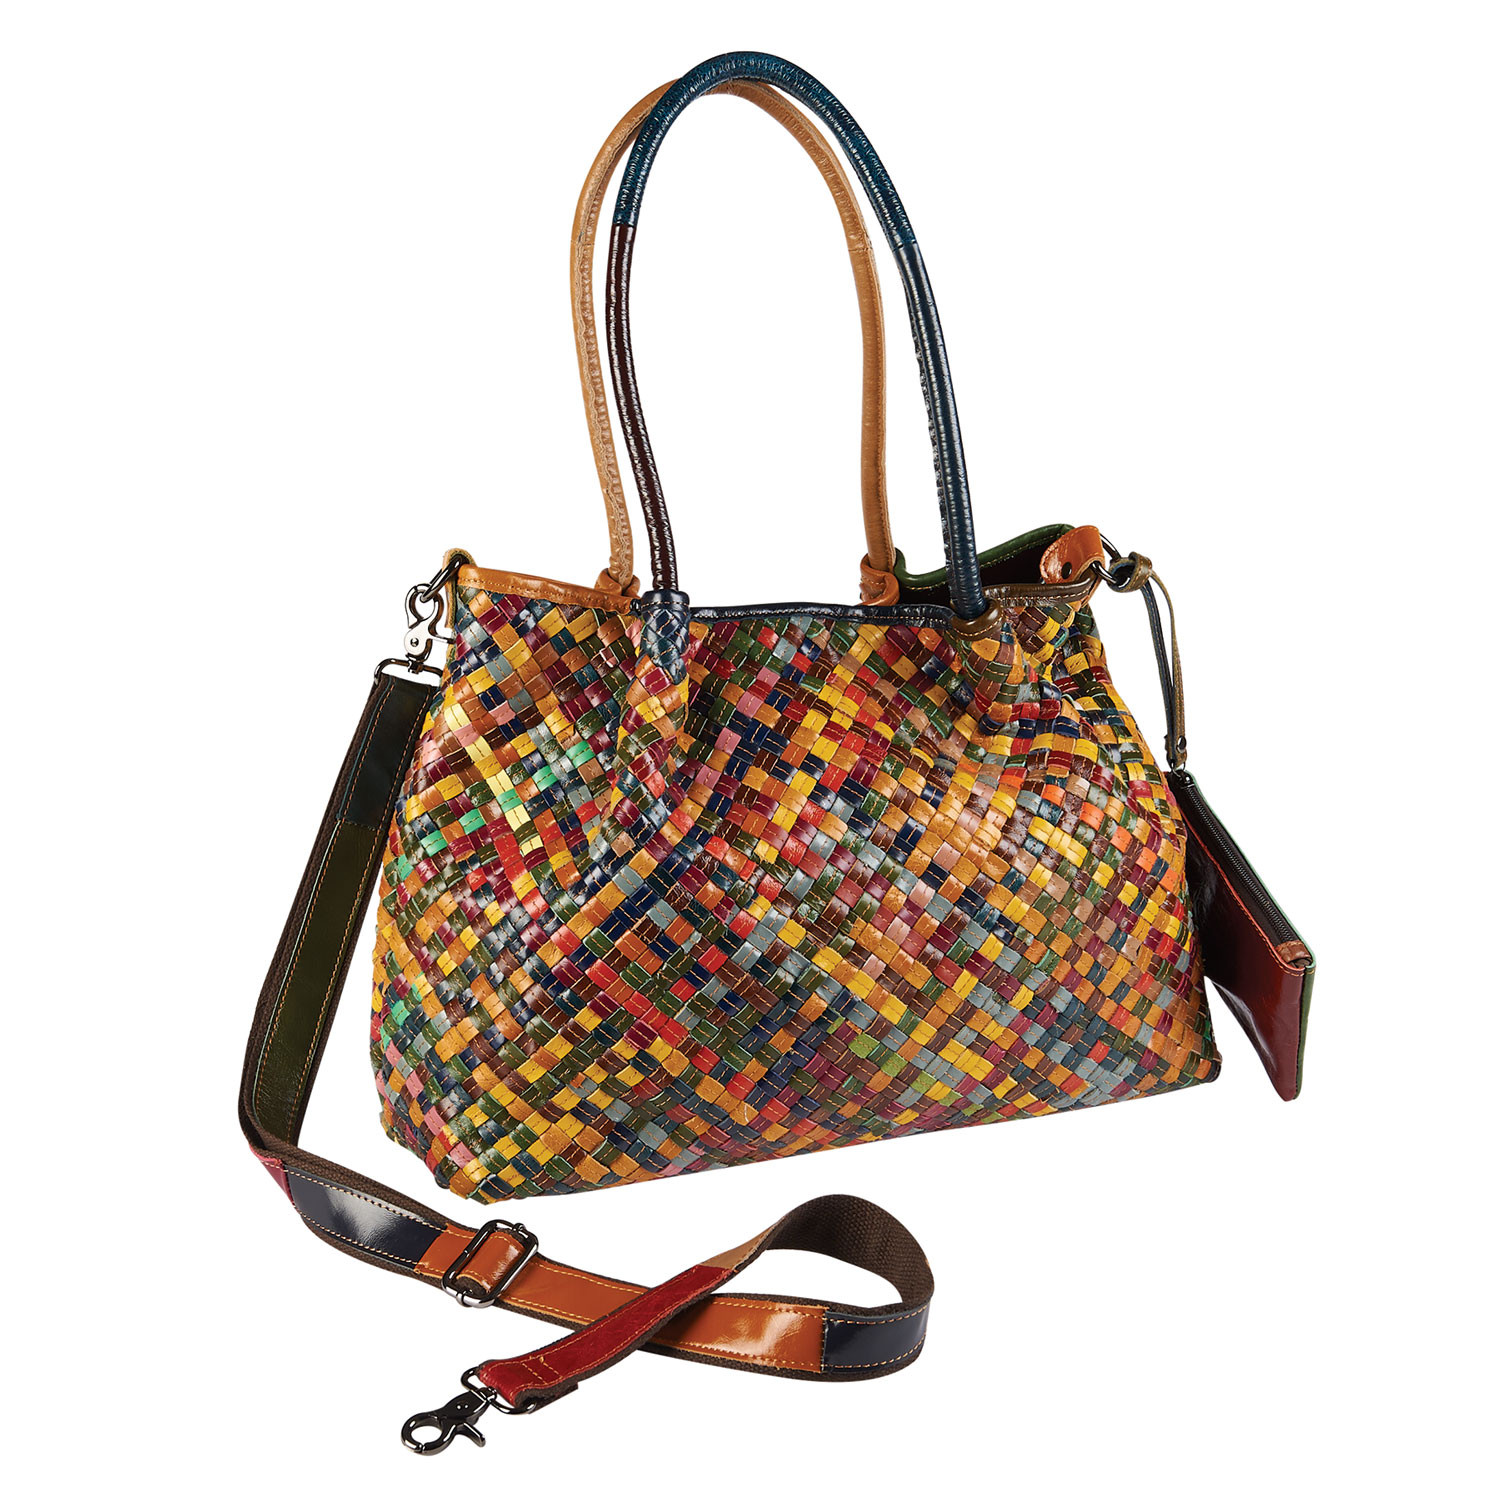 Woven Leather Tote Bag | Shop.PBS.org